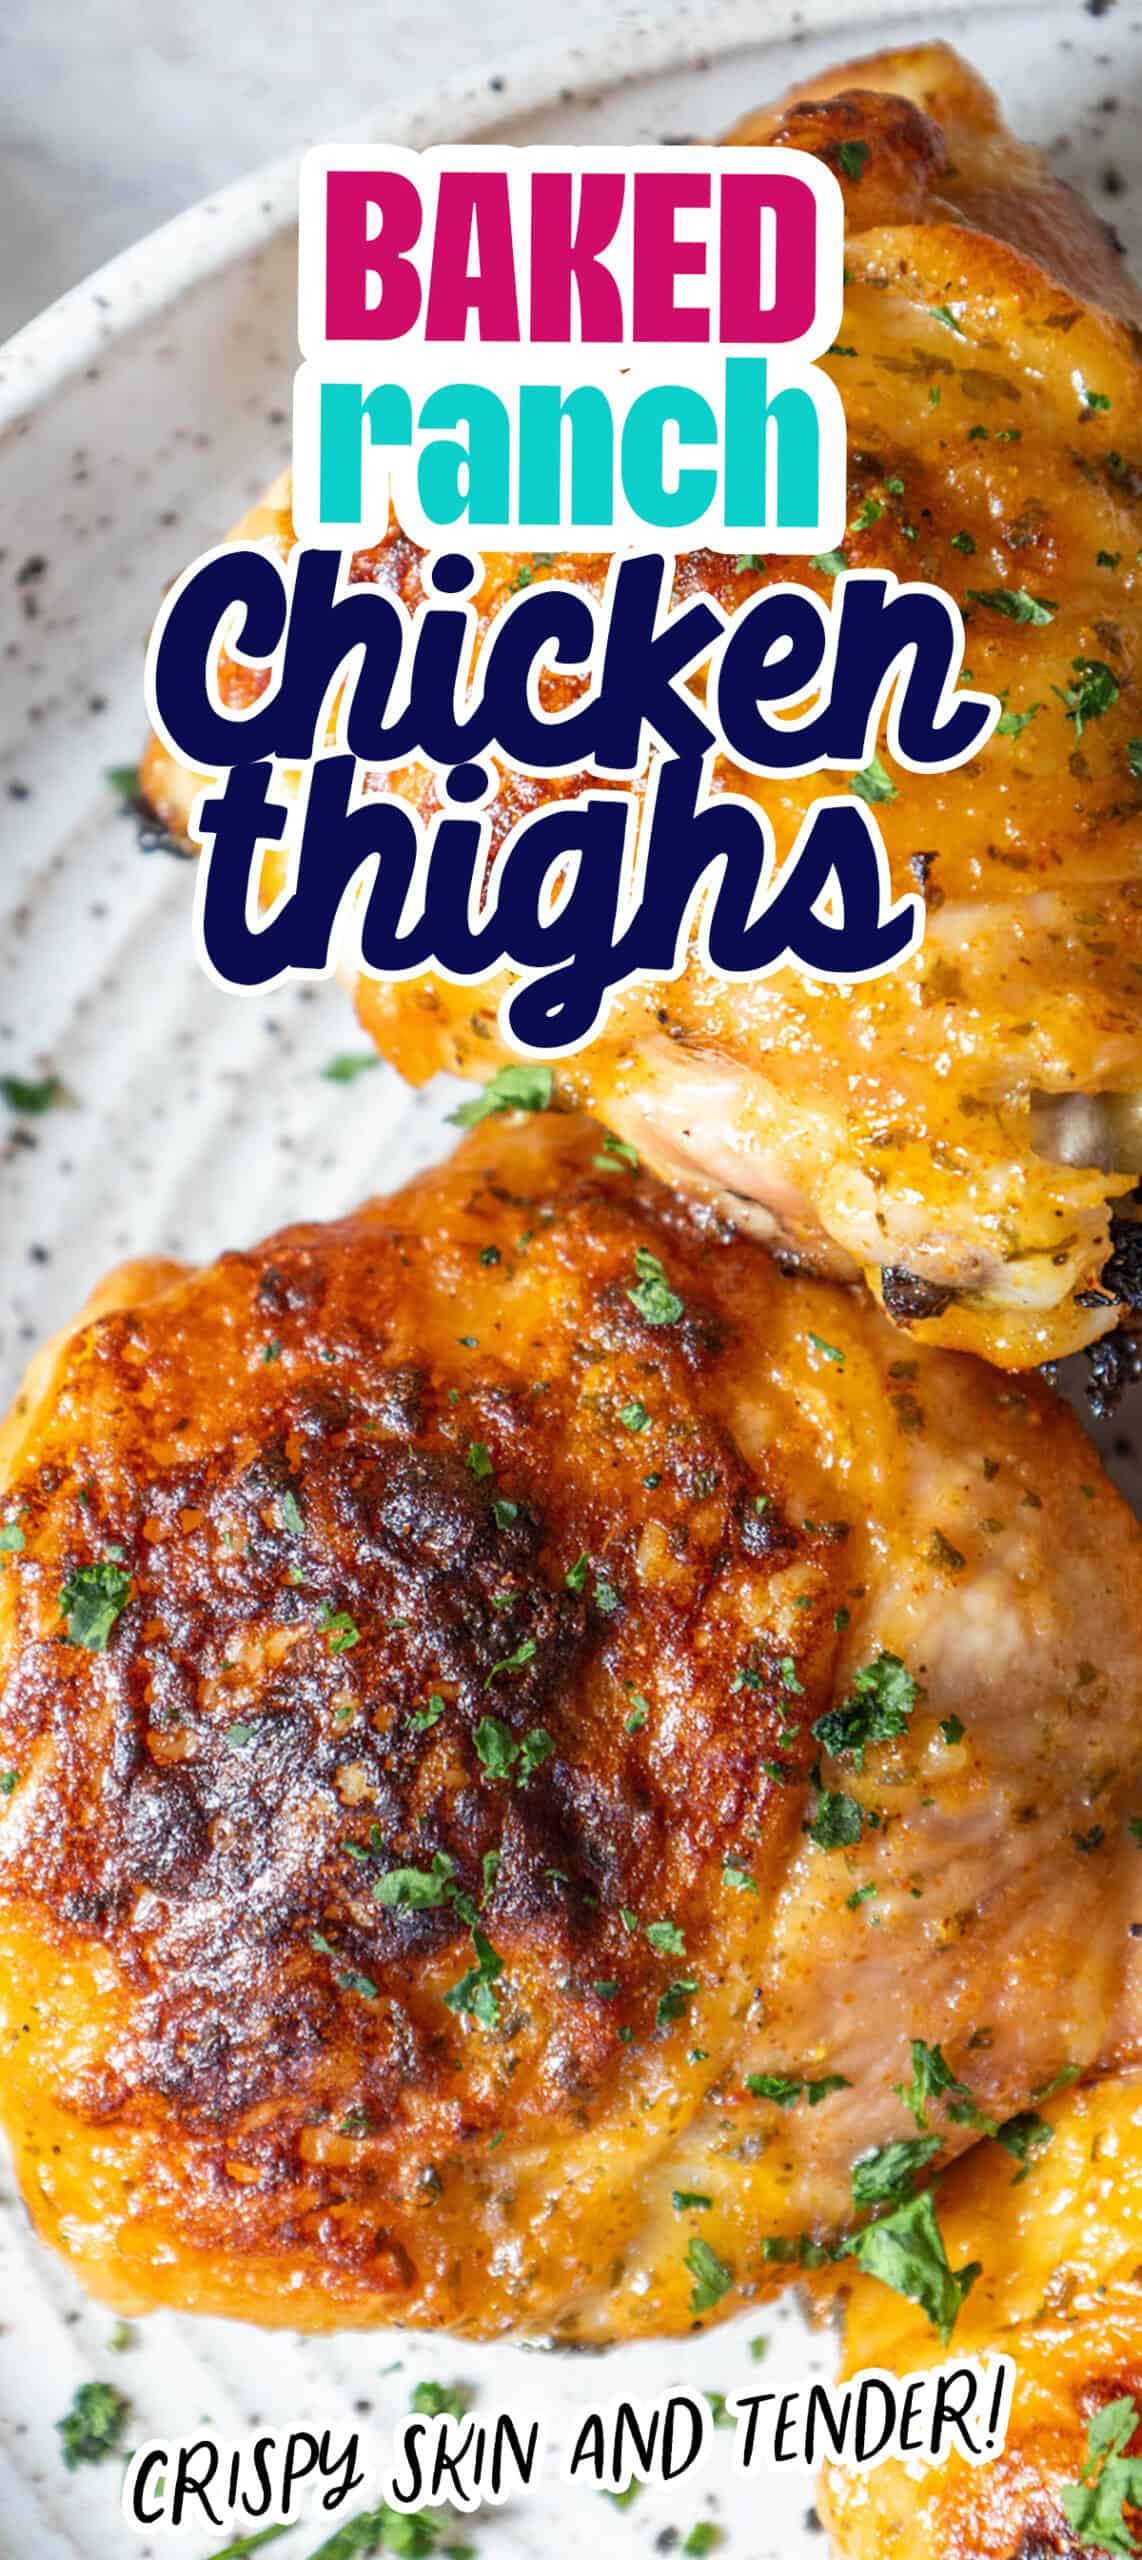 Baked ranch chicken thighs with a flavorful twist.